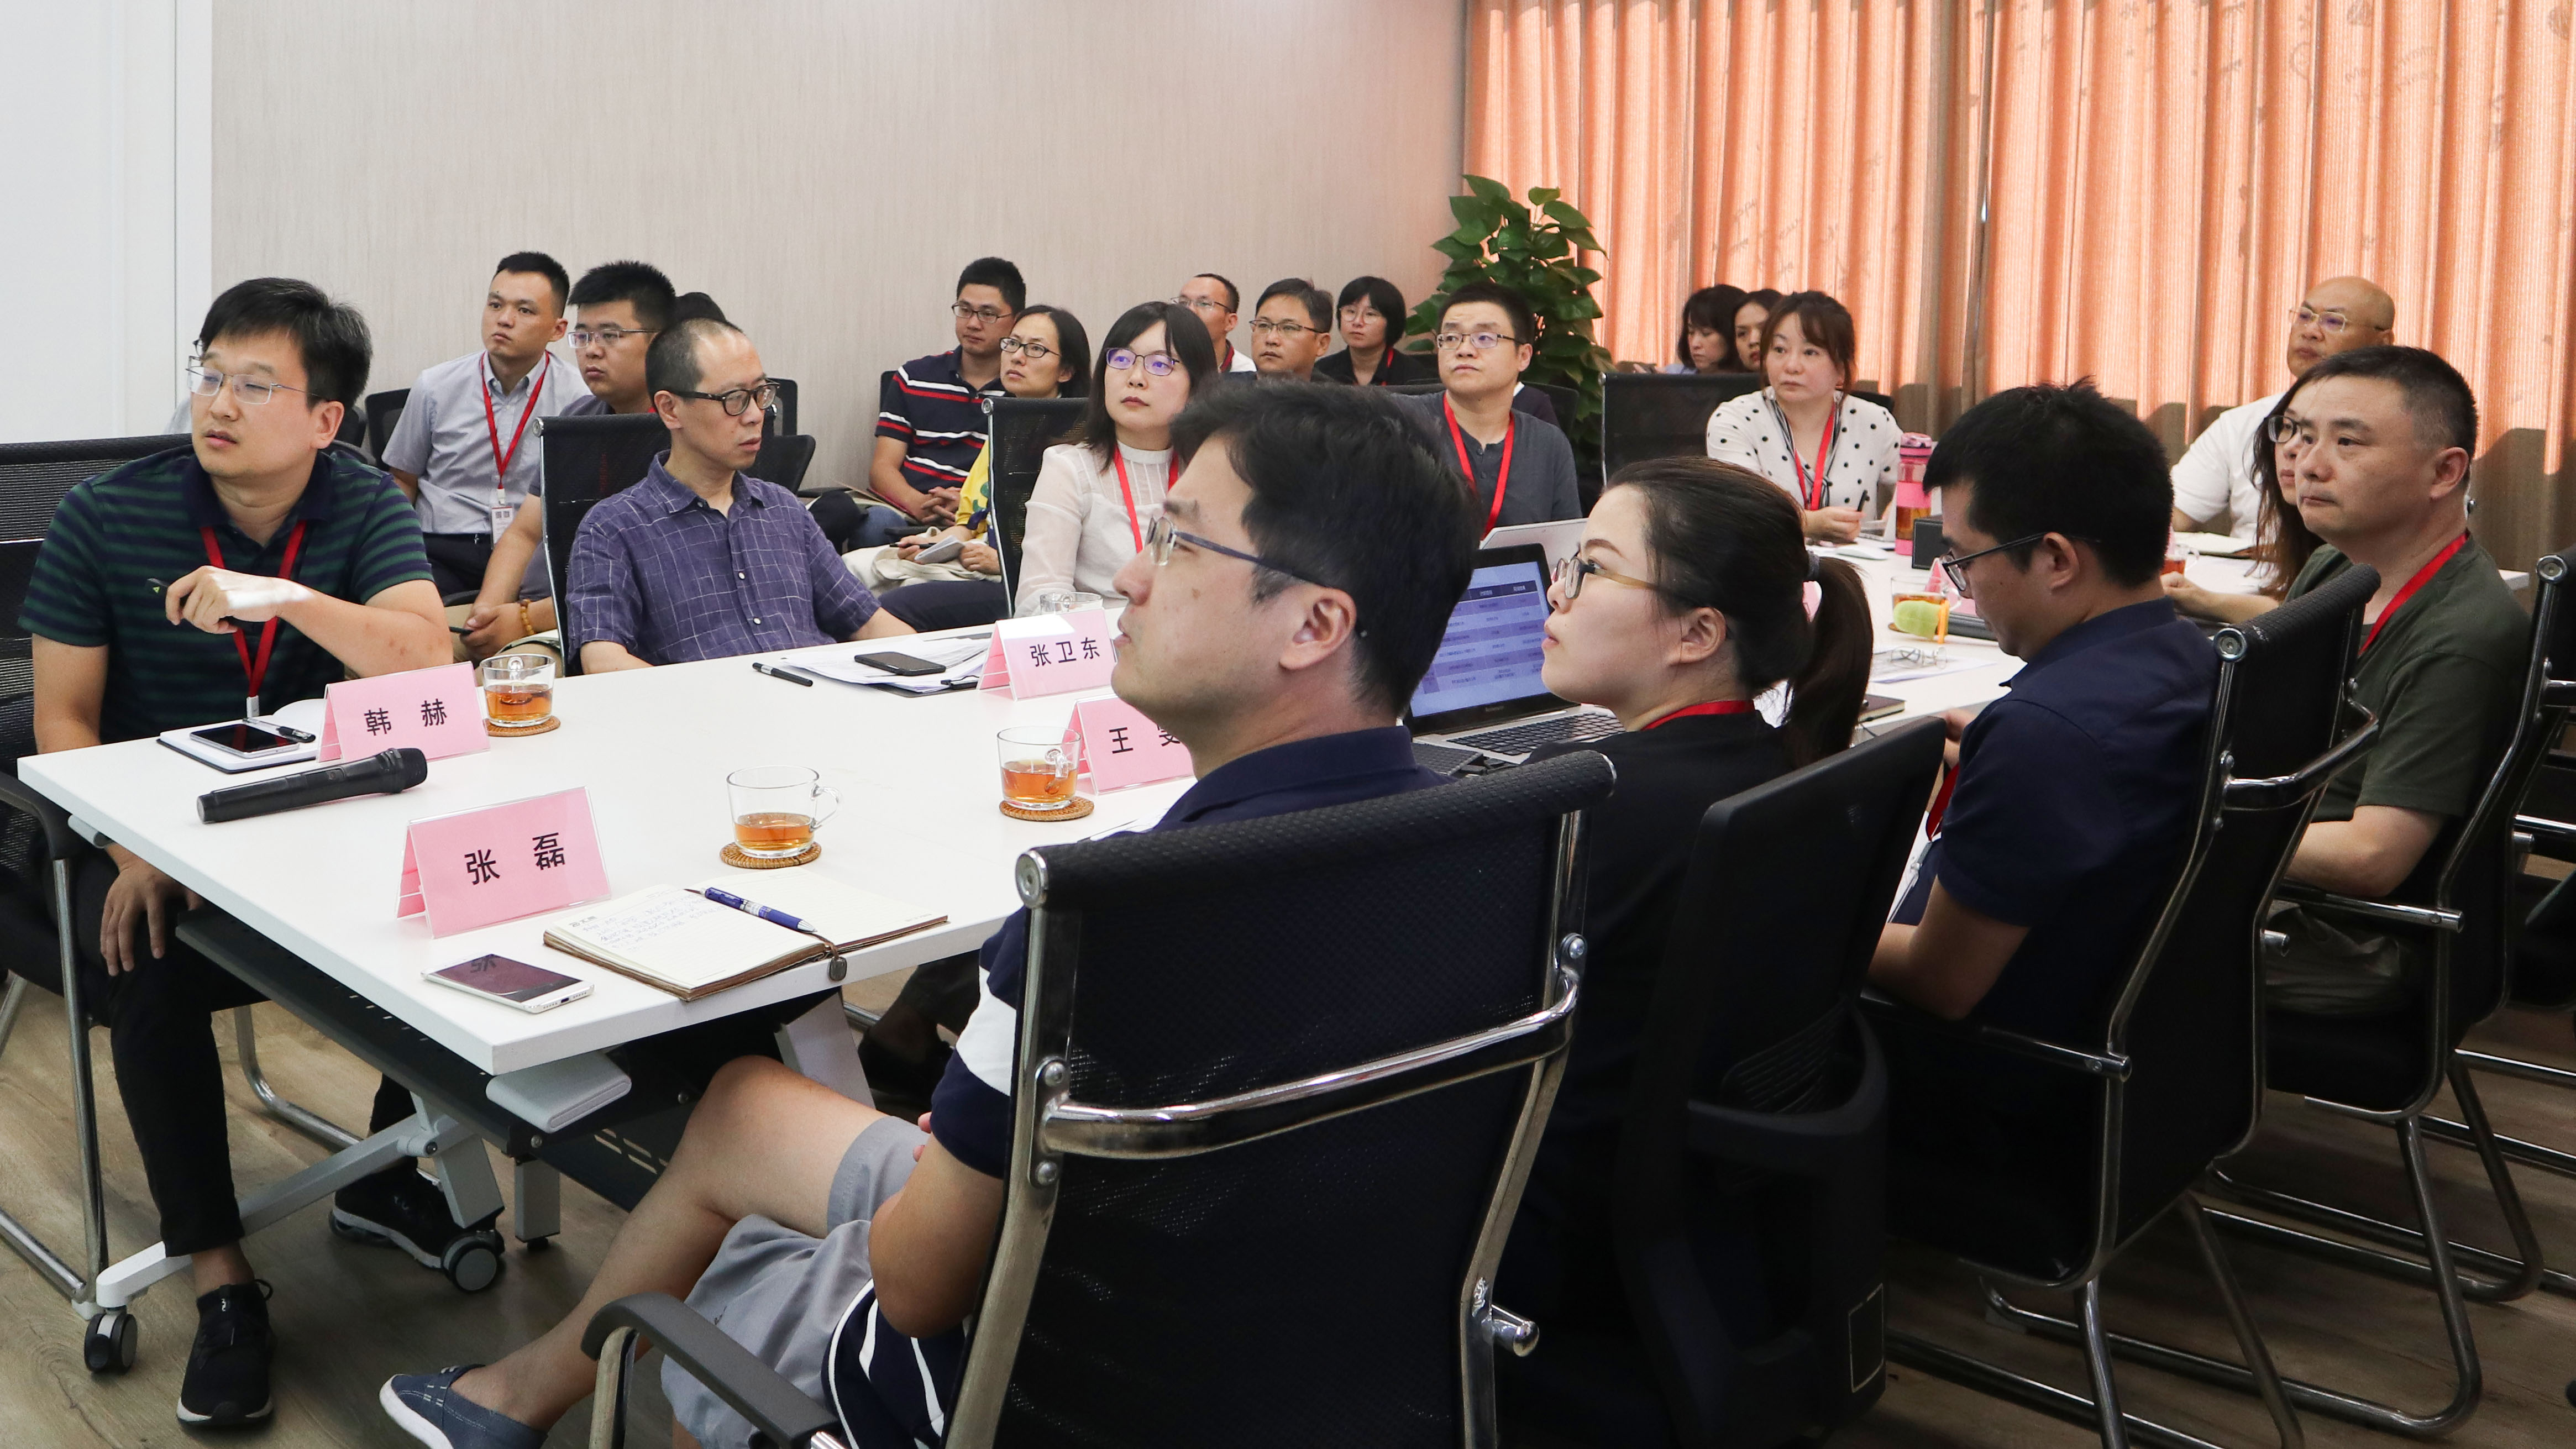 Chengbang Design Group's 2019 semi-annual work meeting ended successfully